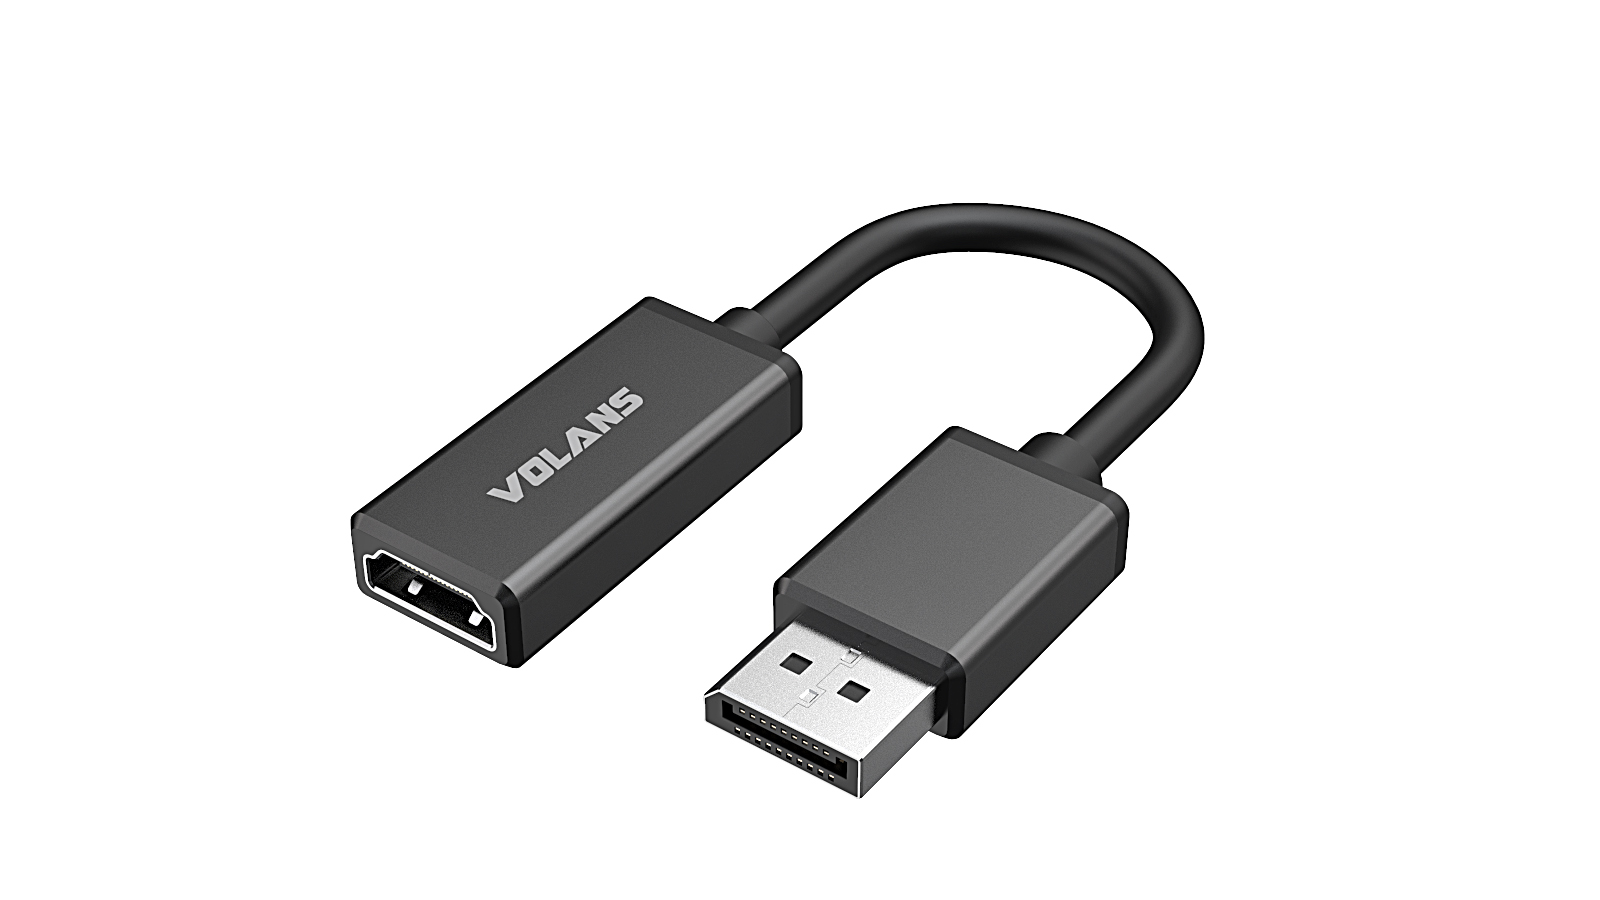  Aluminium ACTIVE DisplayPort 1.4 to HDMI 2.0b with HDR10 - Supports 4K @60Hz  